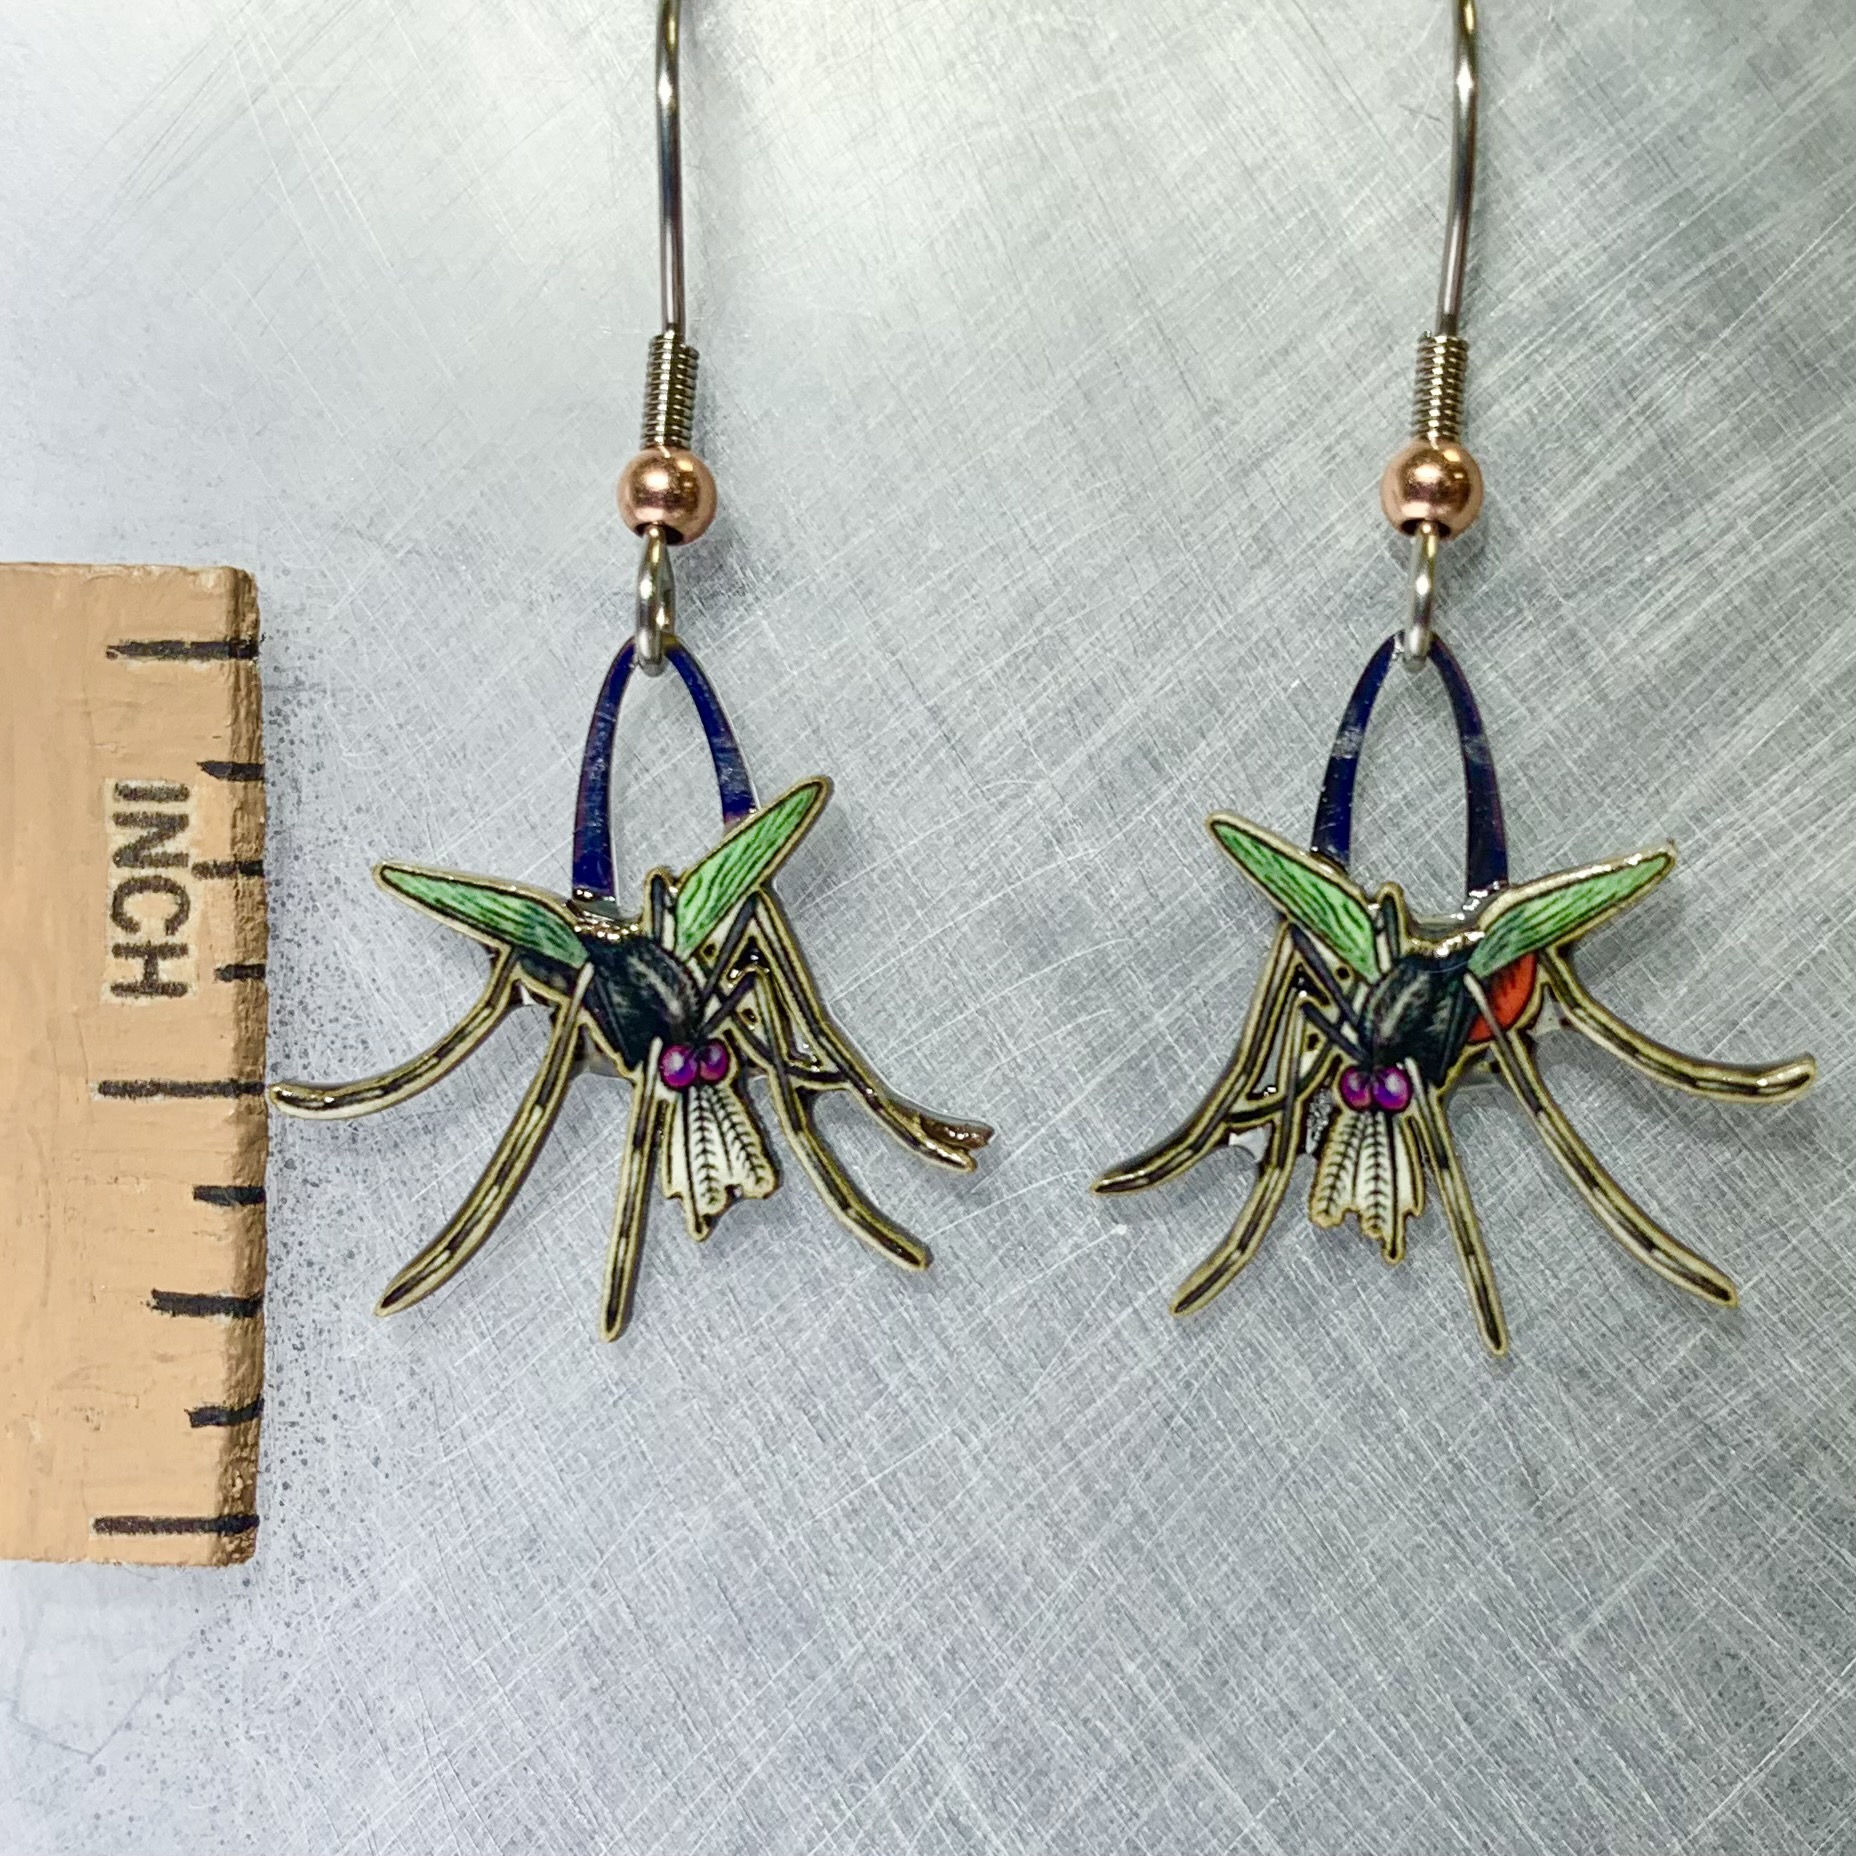 Picture shown is of 1 inch tall pair of earrings of the bug the Mosquito.